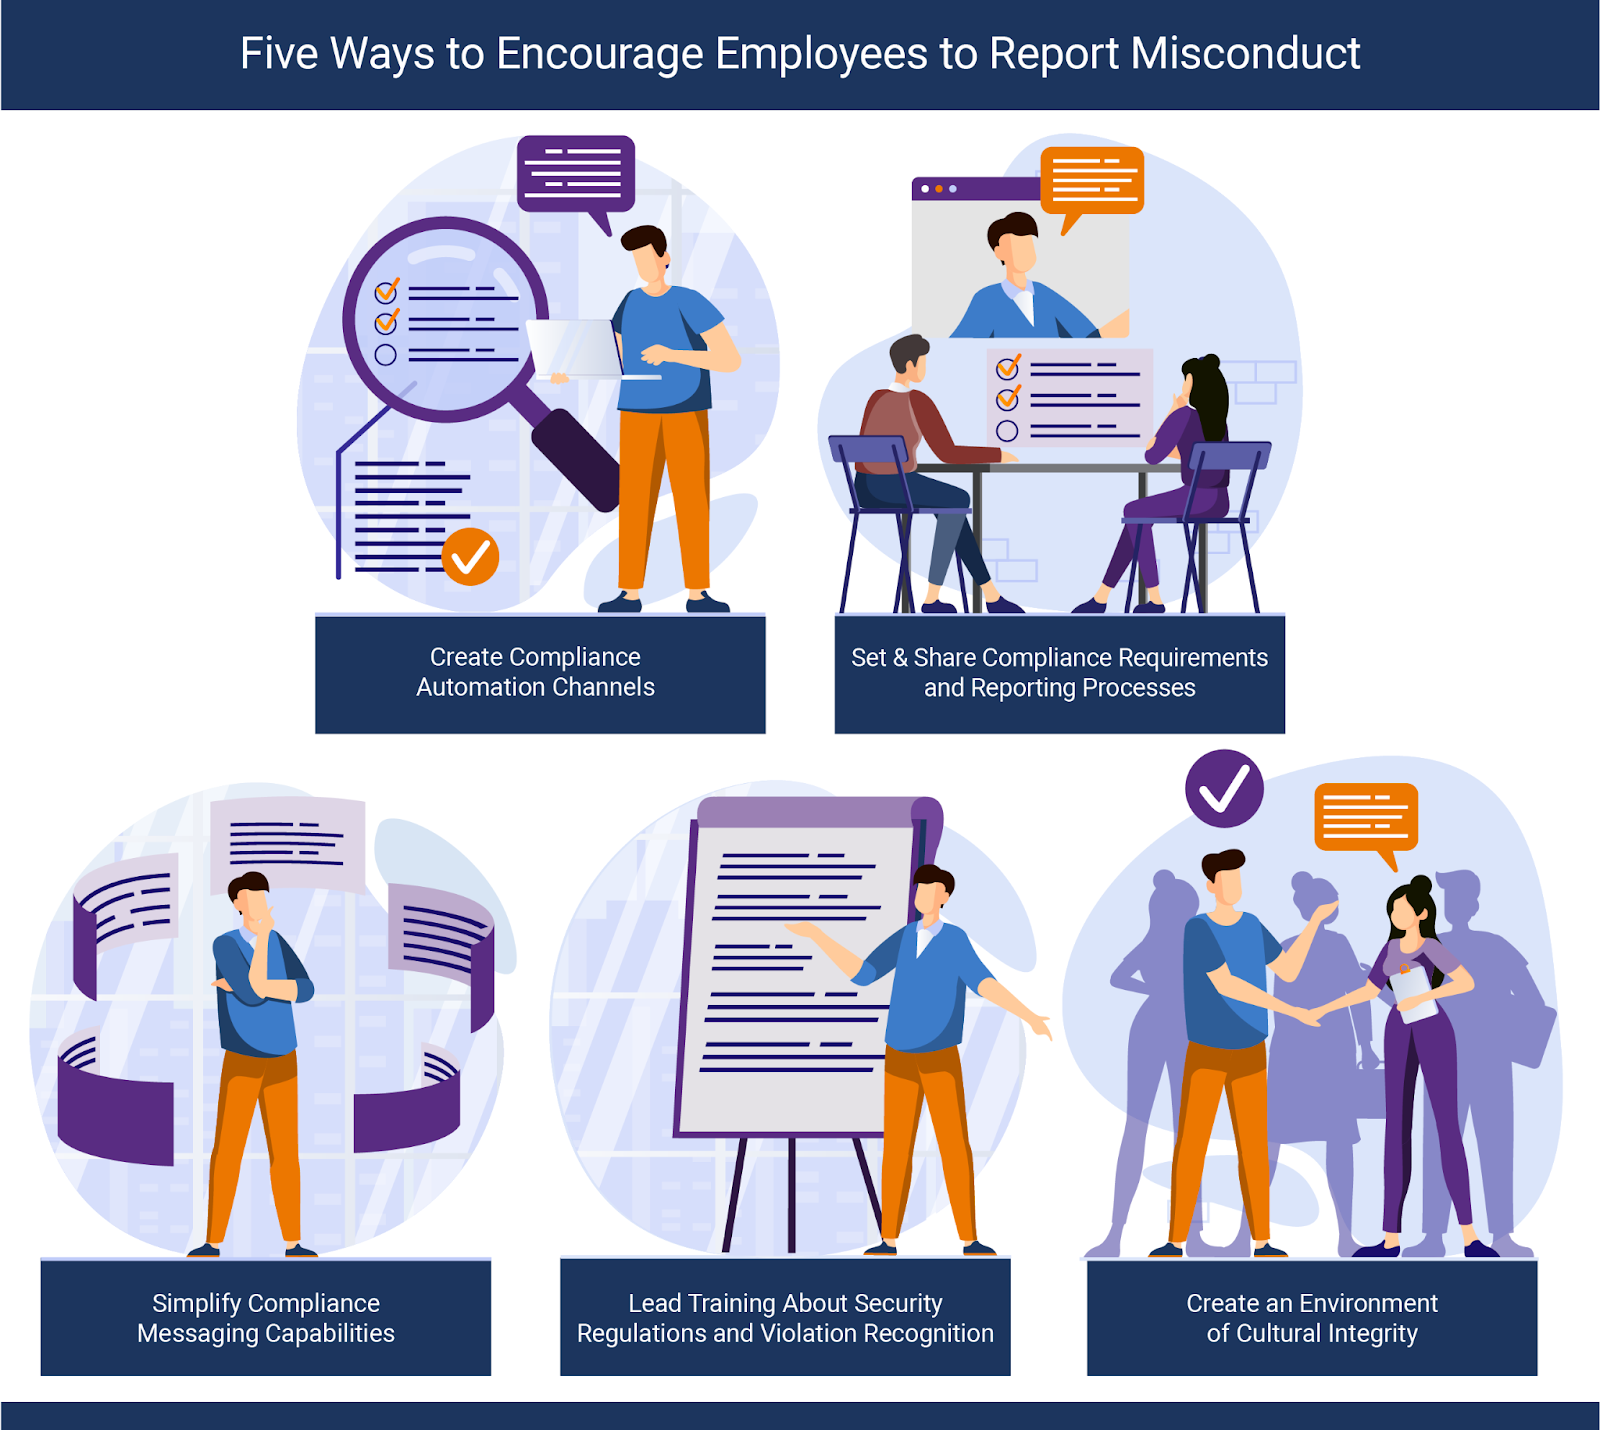 5 Ways to Encourage Employees to Report Misconduct